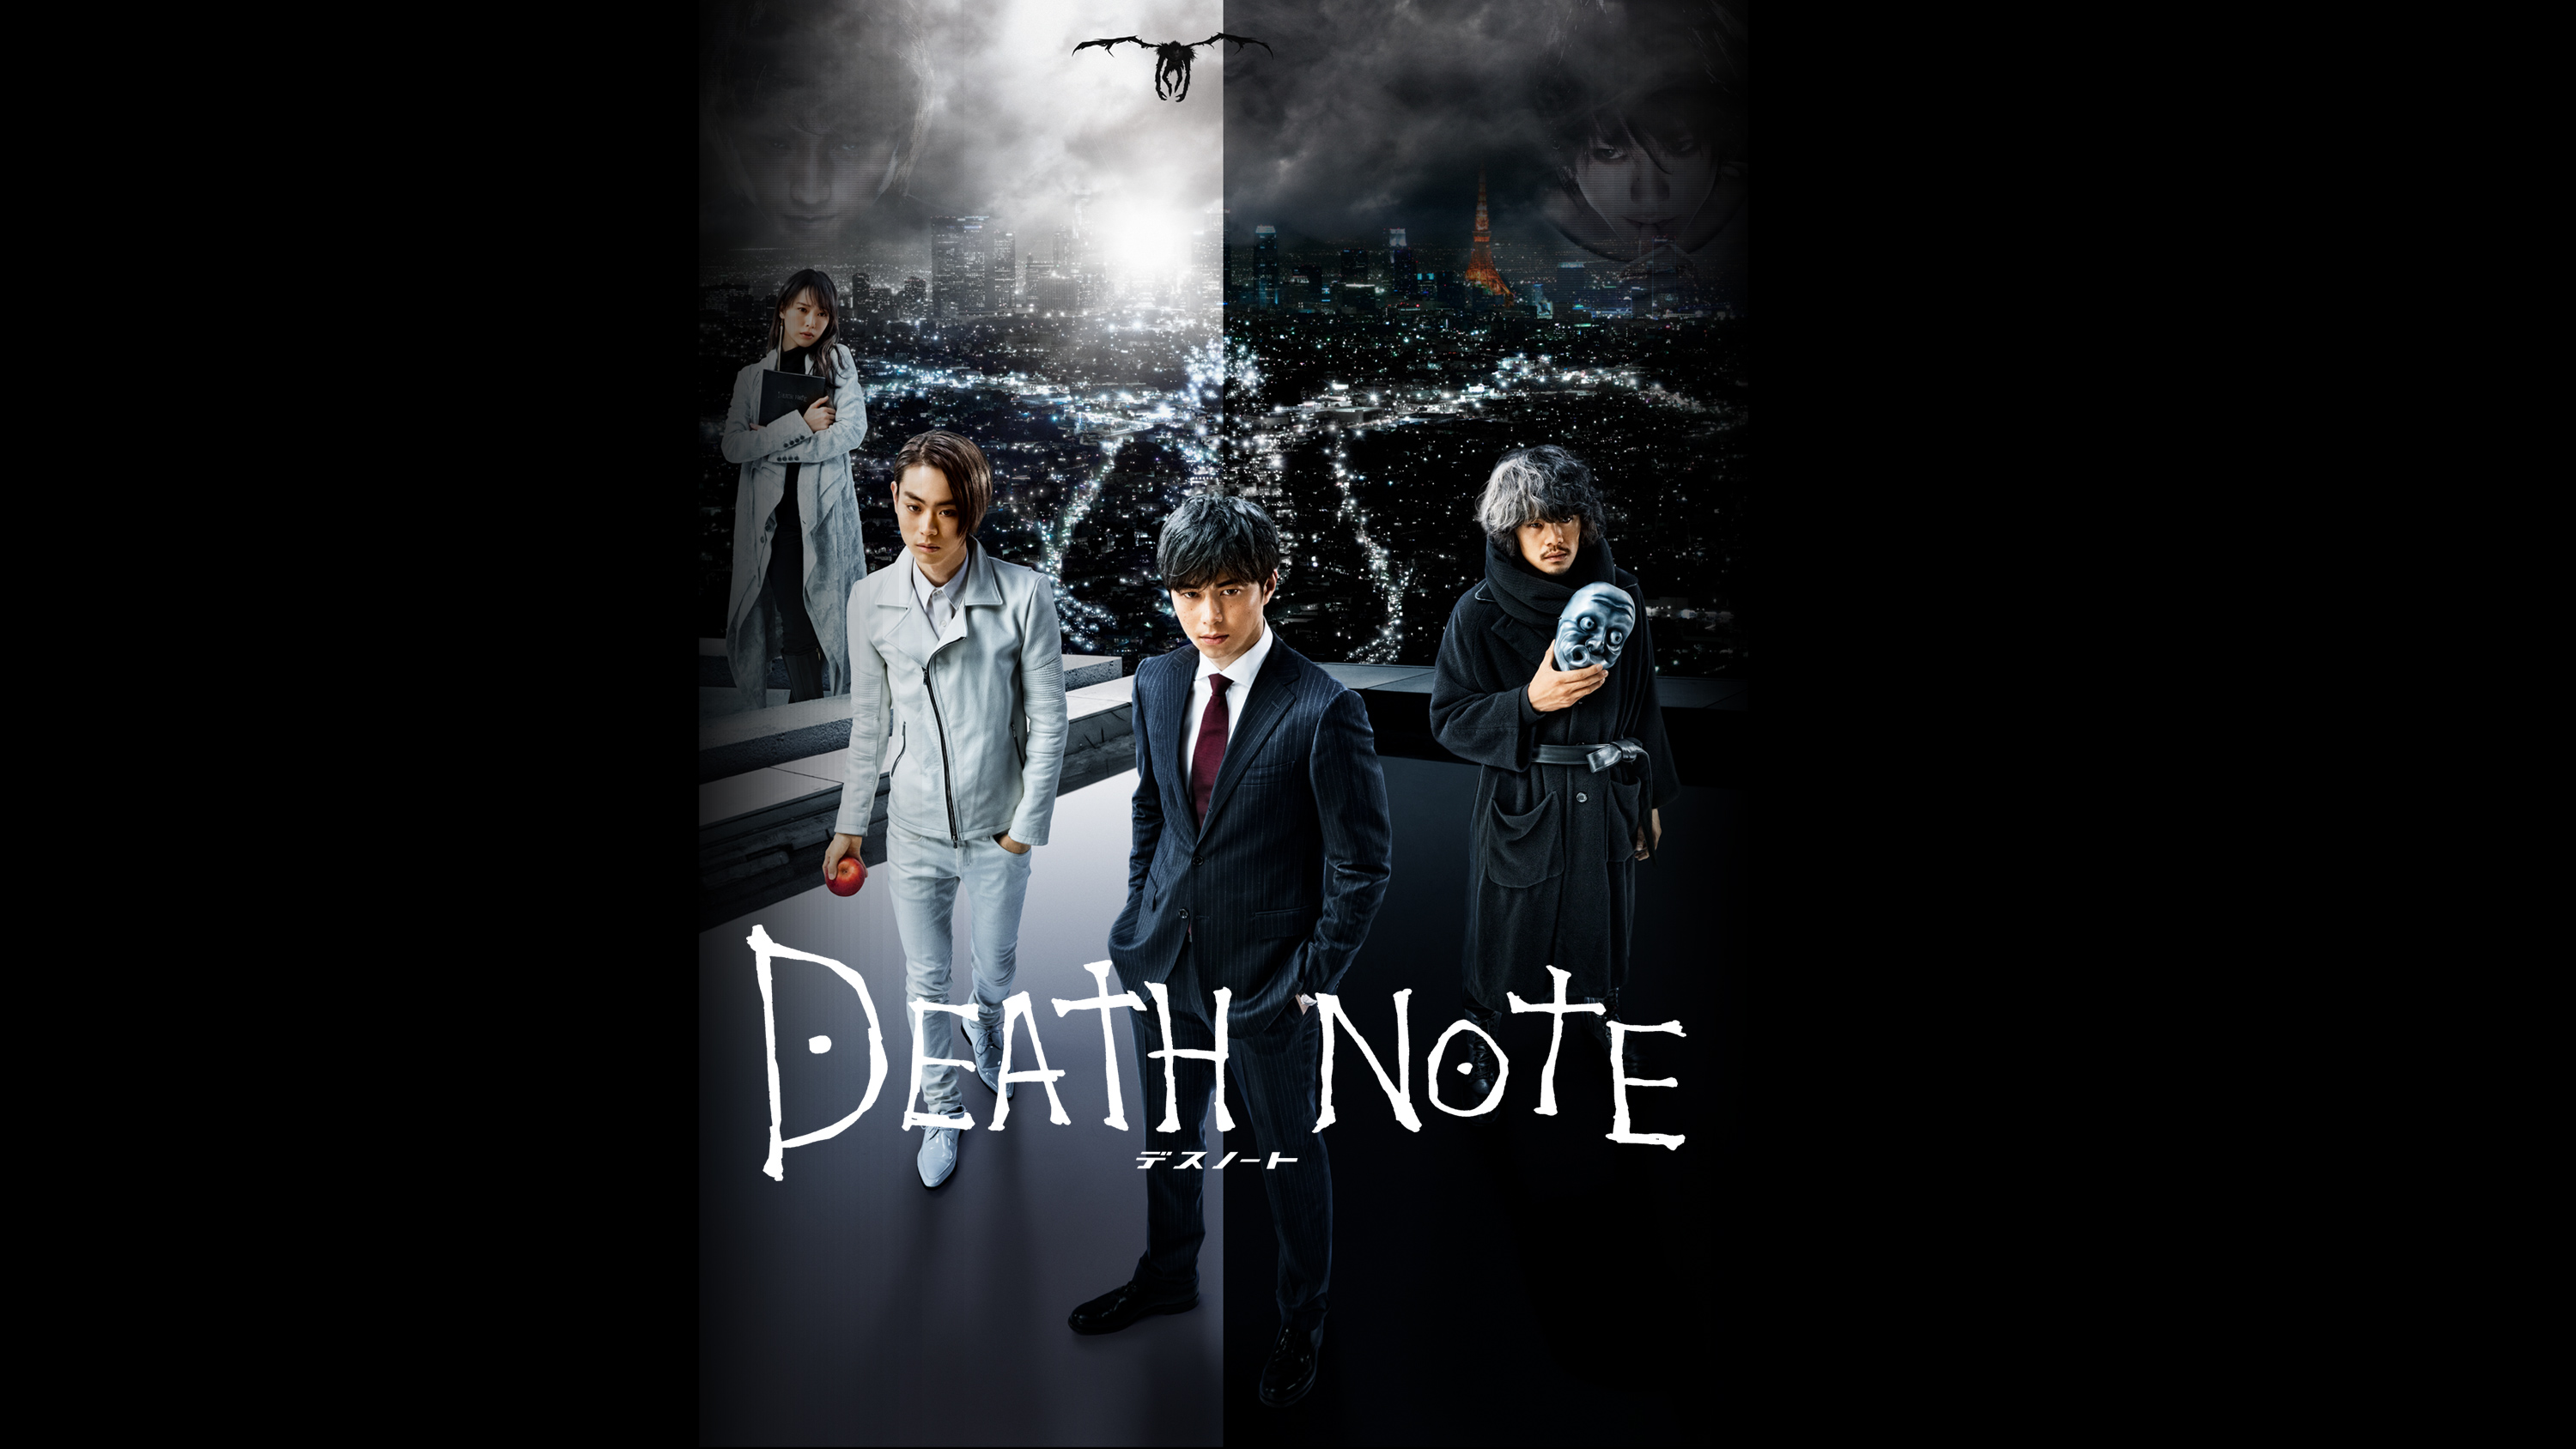 death note 2006 english dubbed movie online